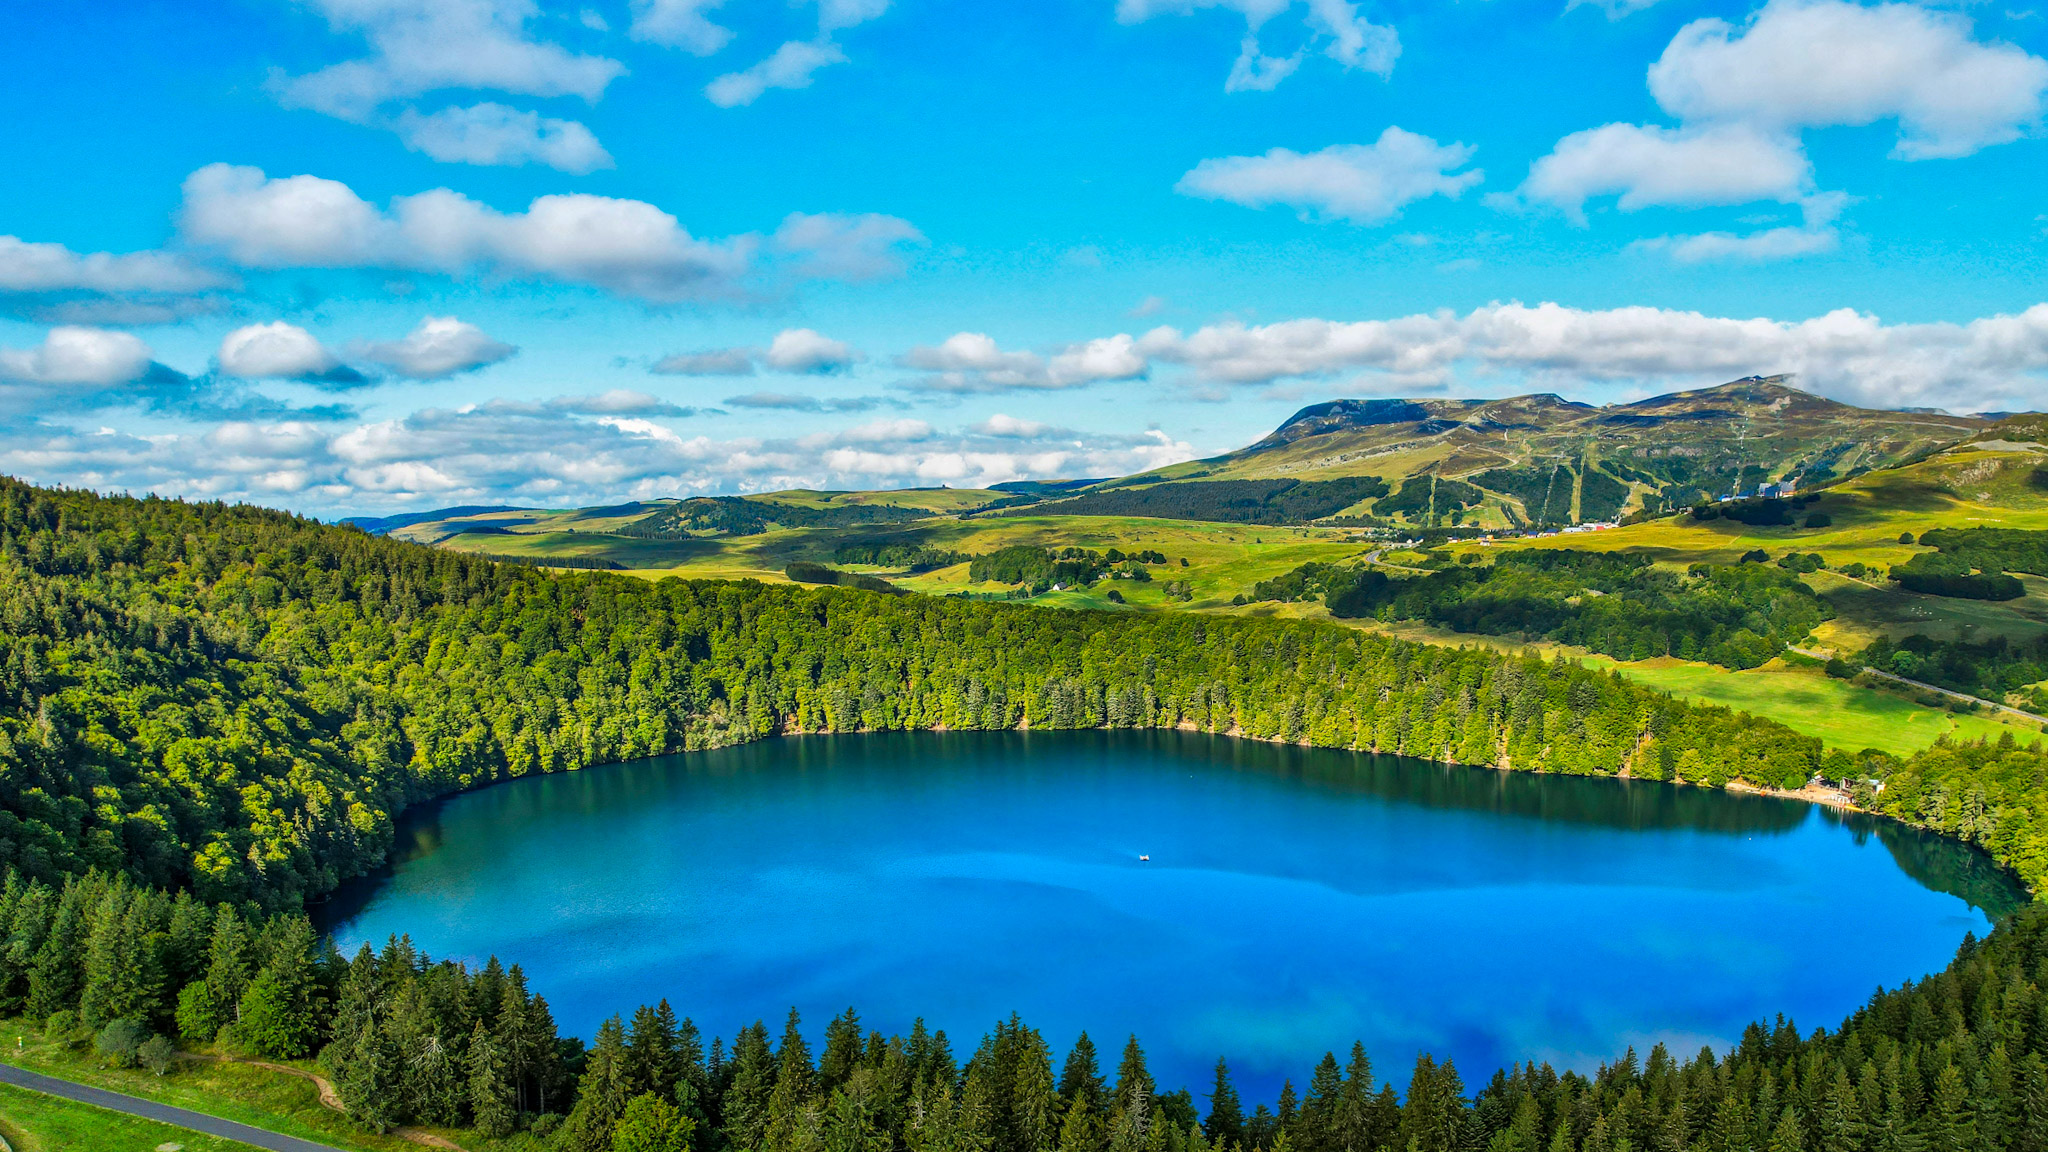 Lac Pavin - Lake seen from the sky